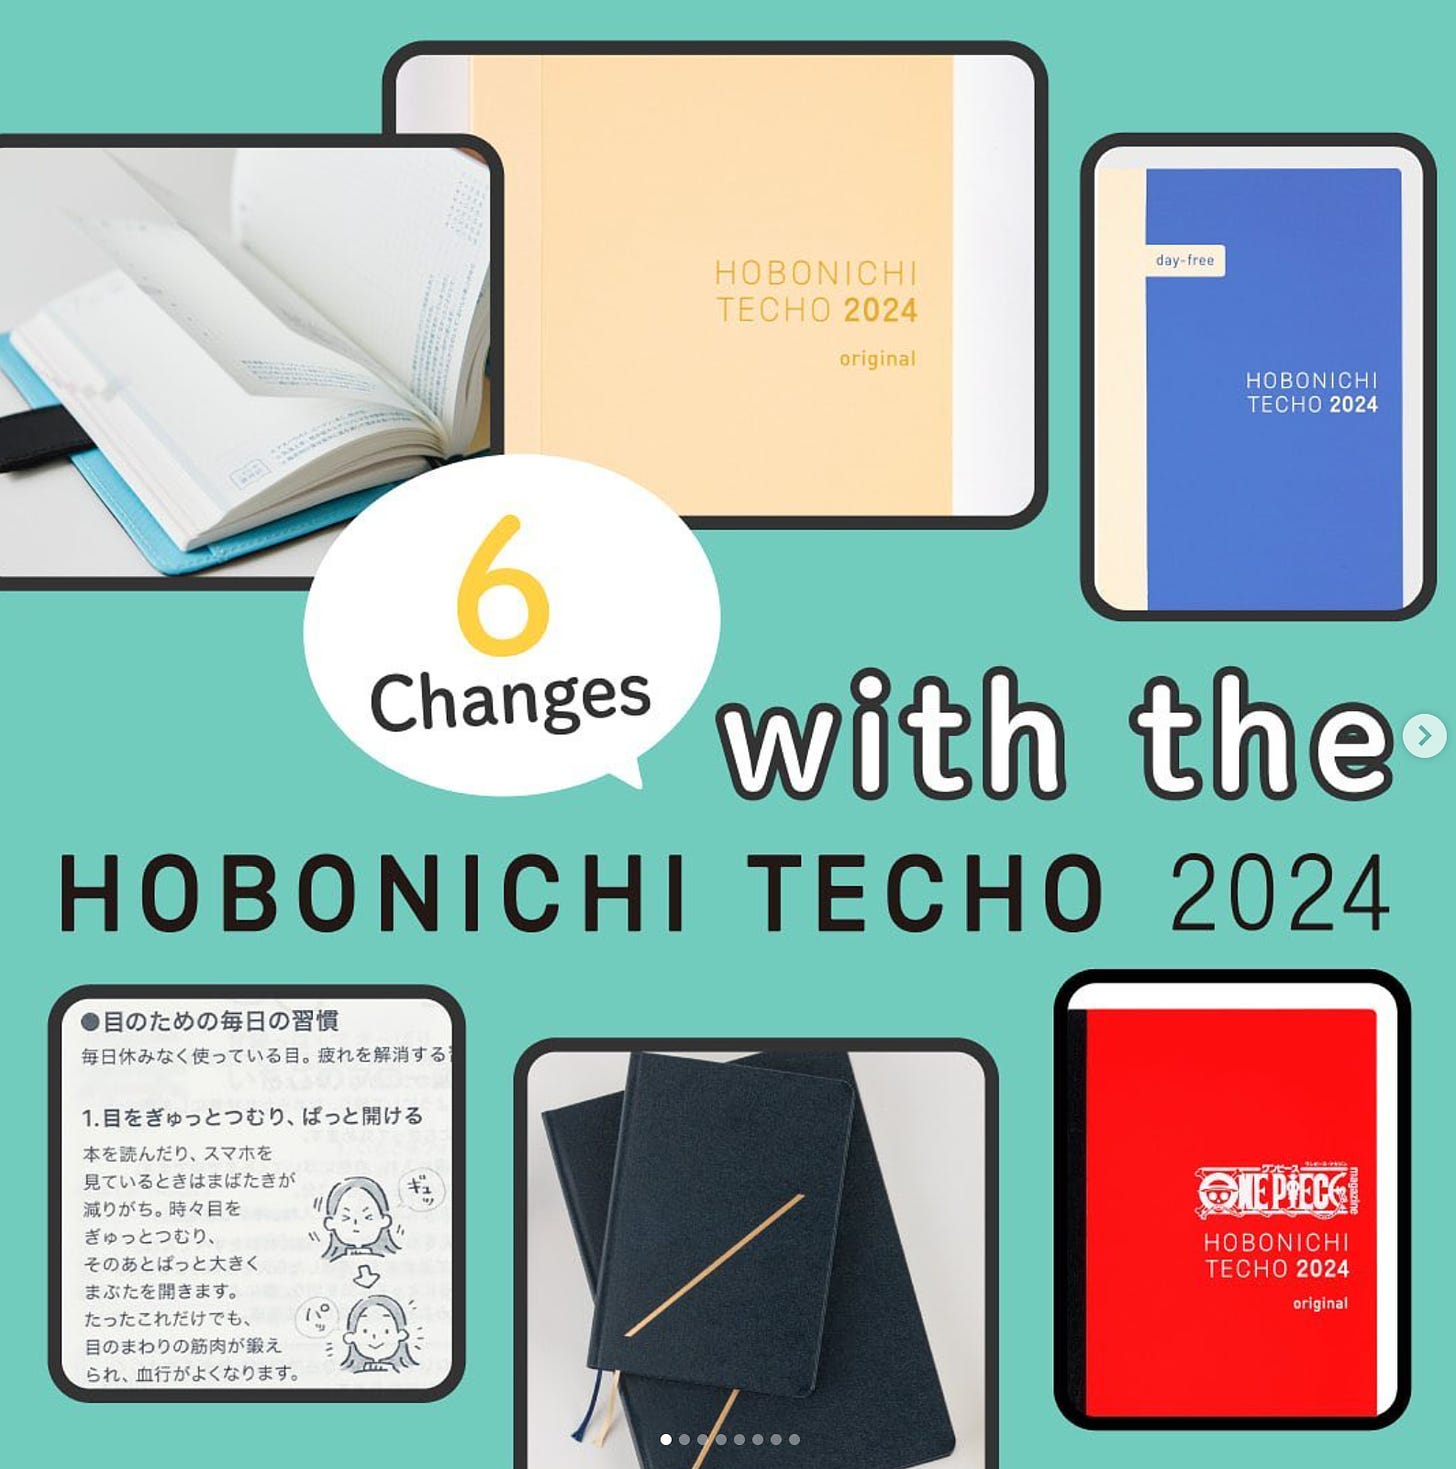 6 changes with the Hobonichi Techo 2024